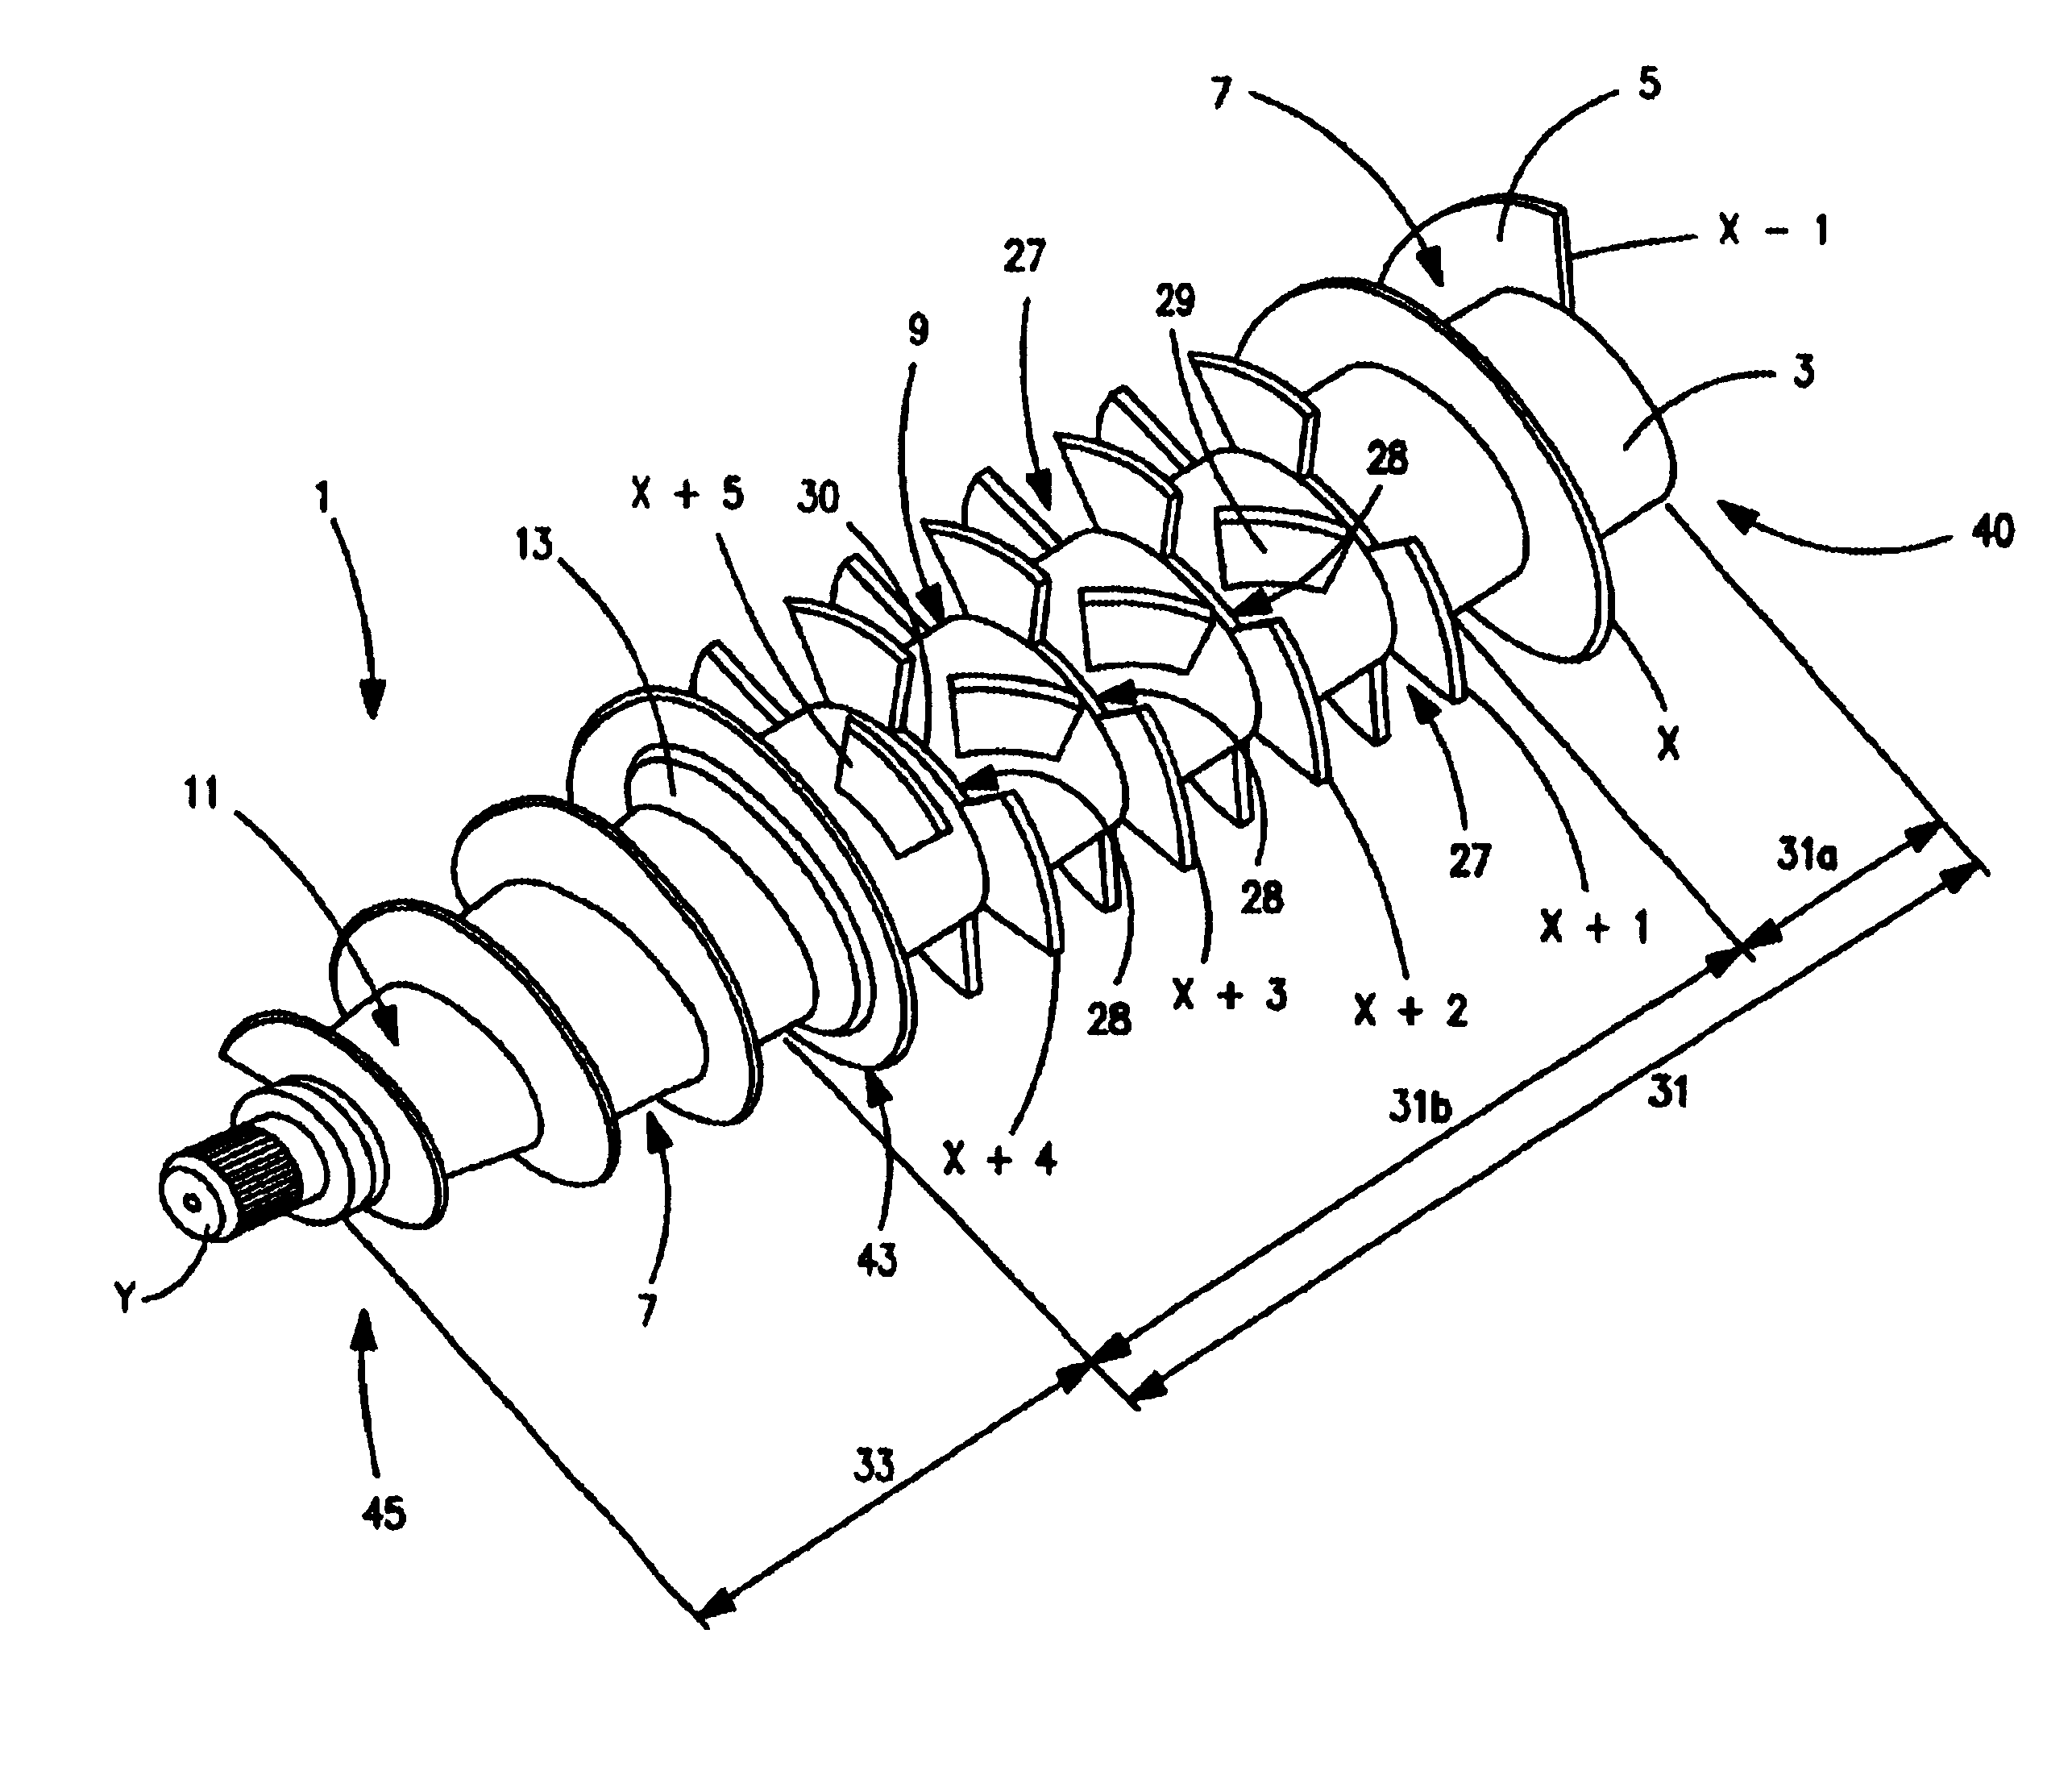 Screw for a solid-bowl centrifuge and a method of extracting oil using the centrifuge